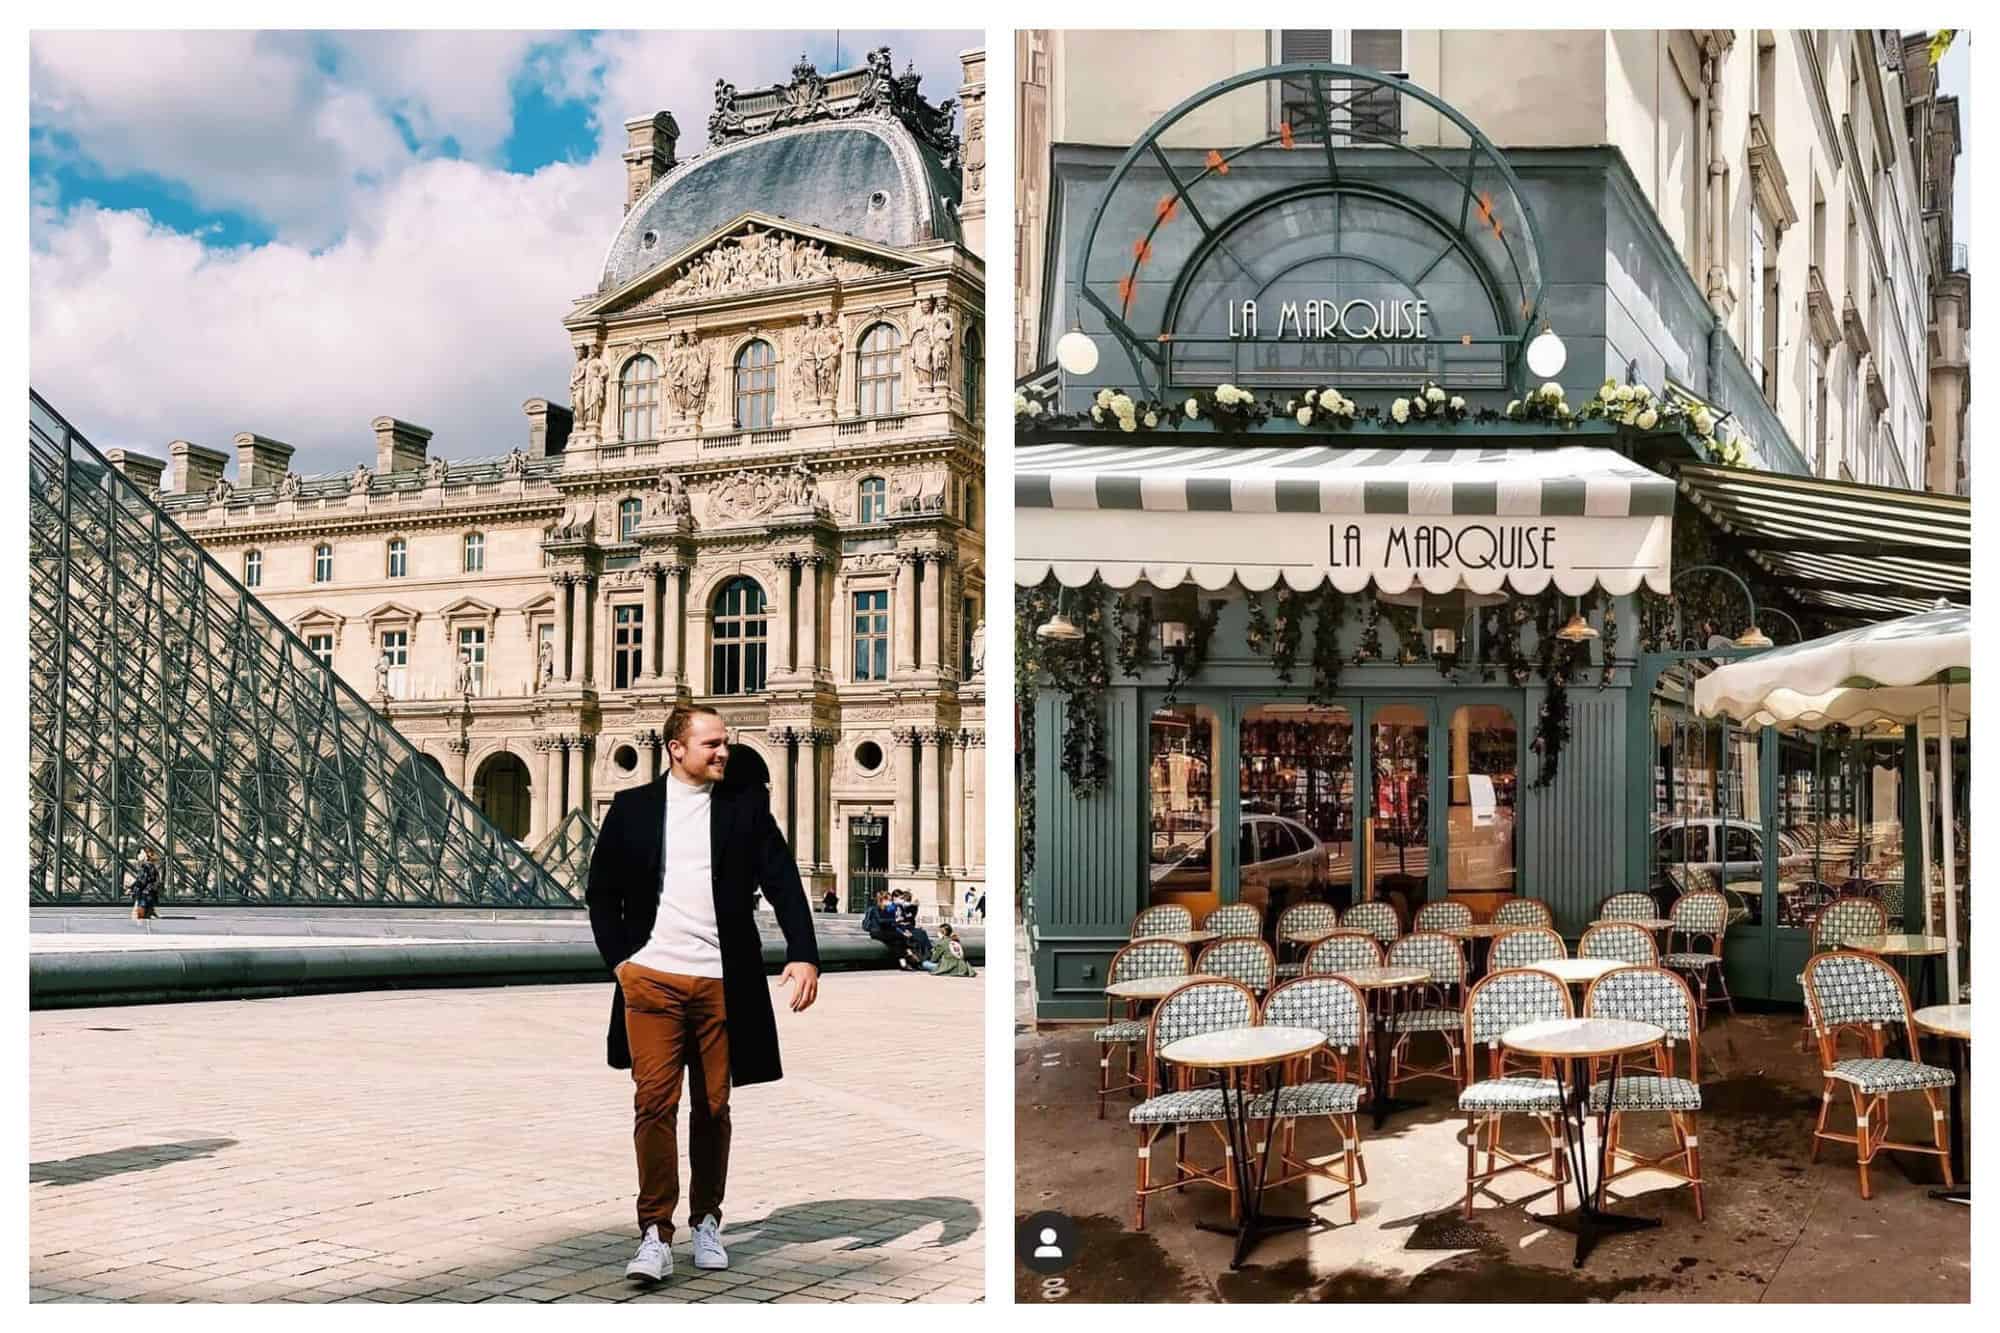 left: loic suberville walking in frnt of the louvre in Paris. Right: the front of a cafe named la marquise in Paris. it is empty but looks ready to welcome customers with its neat white tables and teal coloured cane chairs.